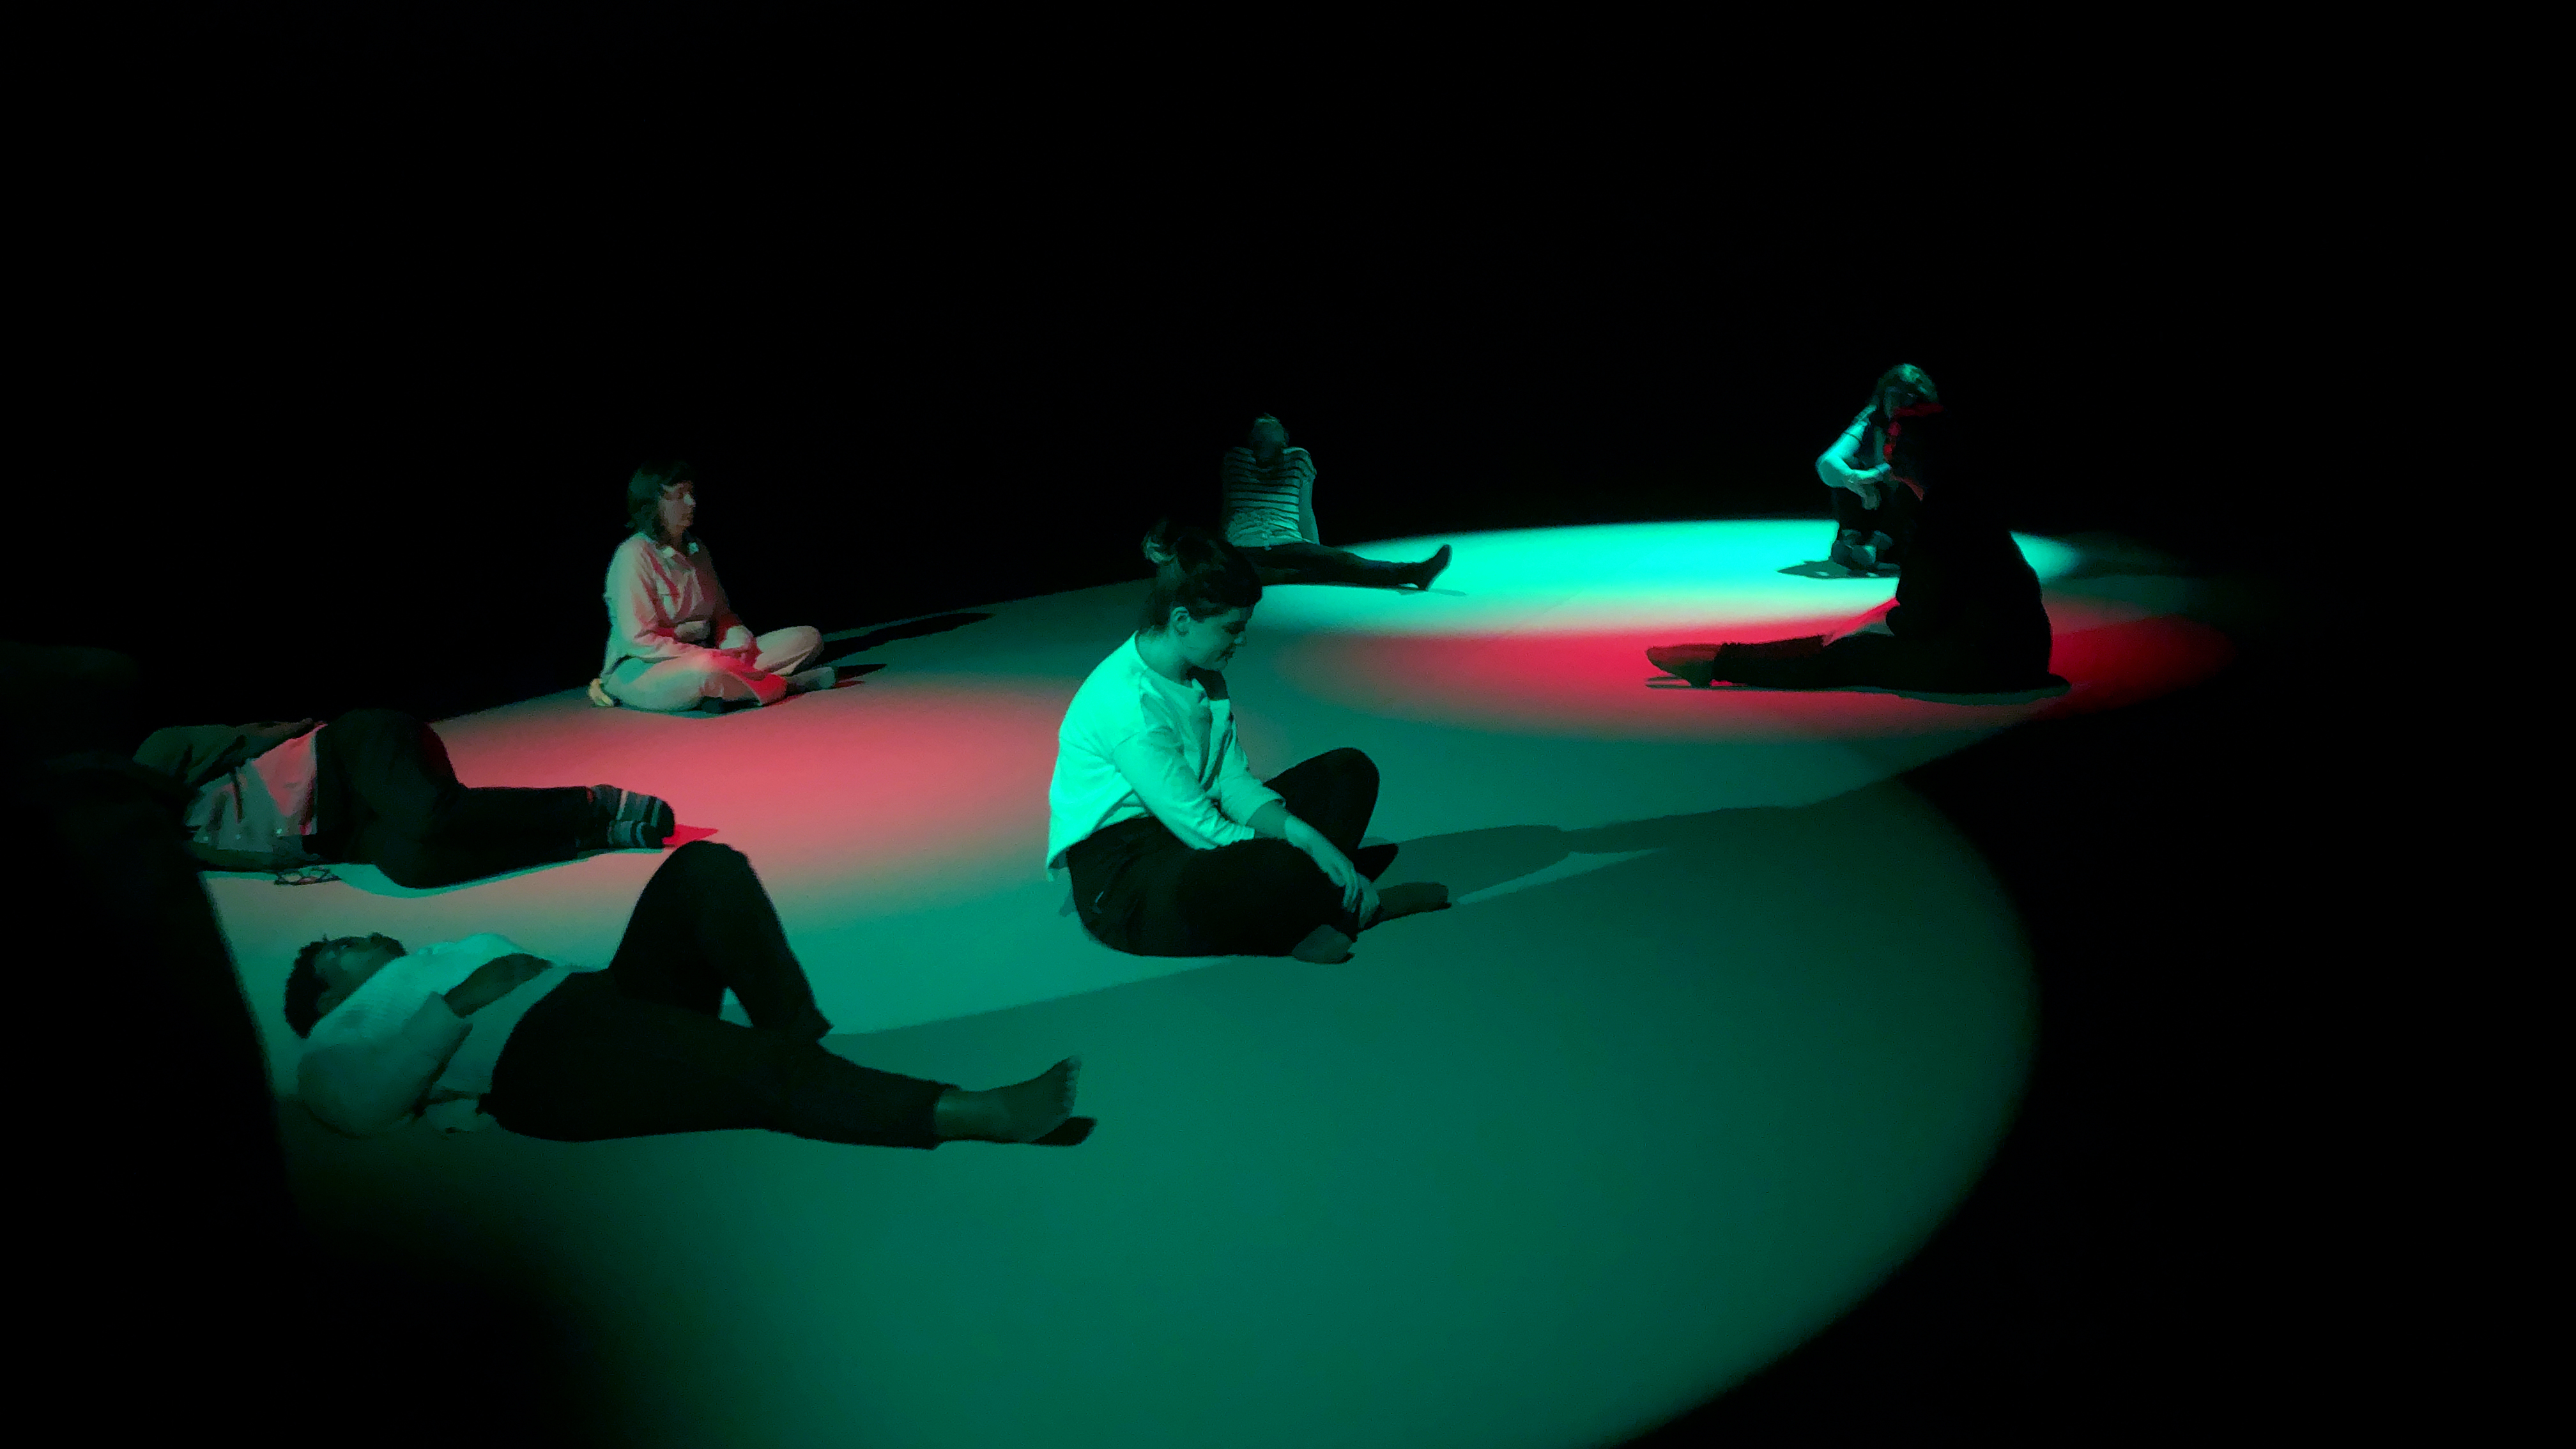 Students and participants sit contemplatively on the floor, which is covered in cyan and red light.